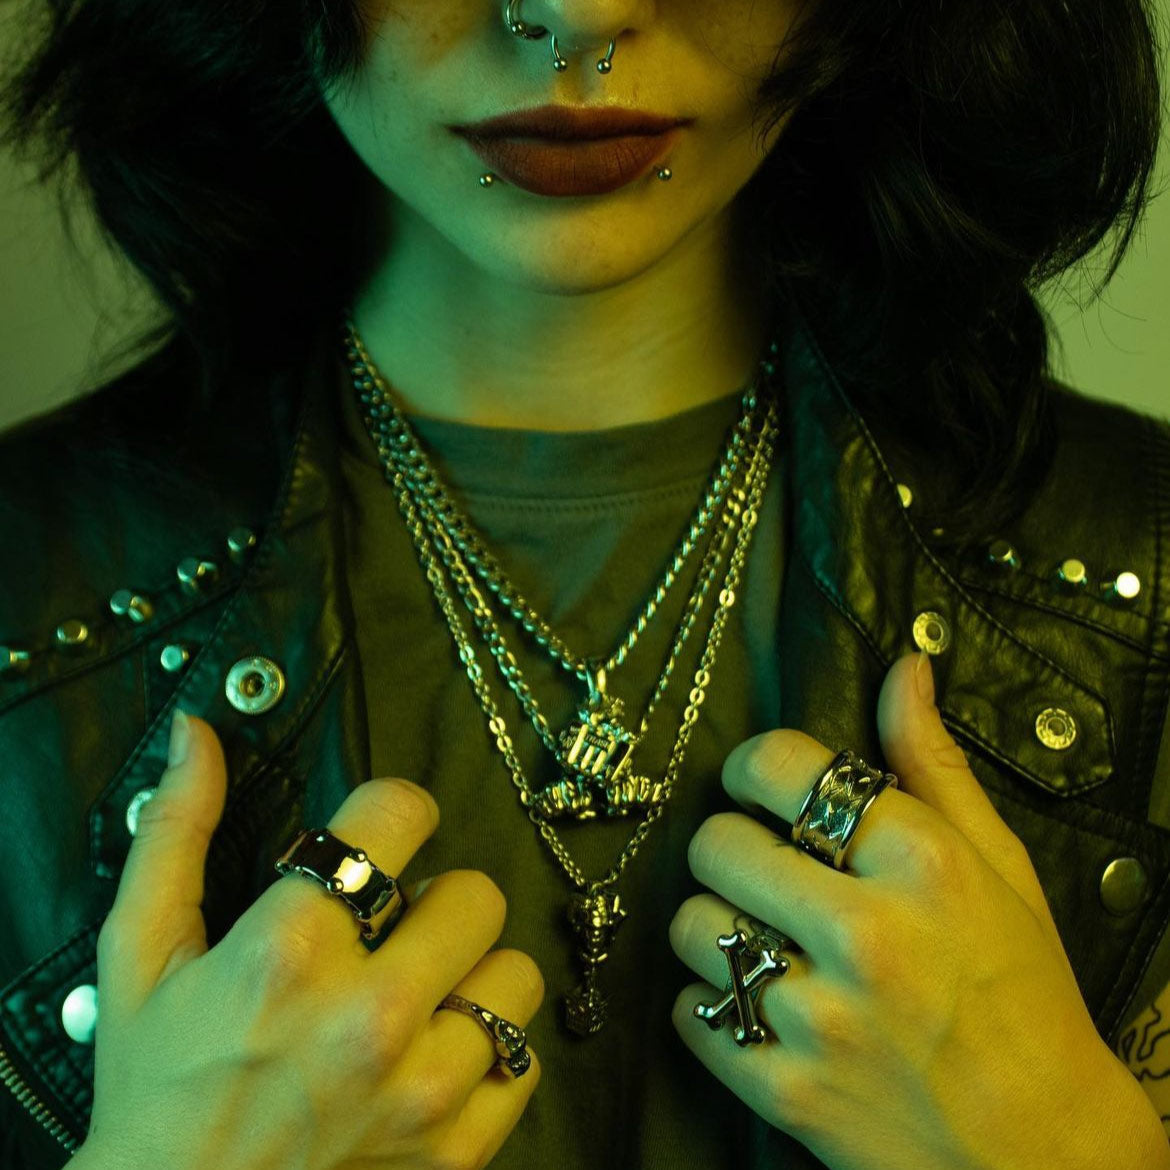 Inna Nord Wearing Goth Jewelry By Personal Fears